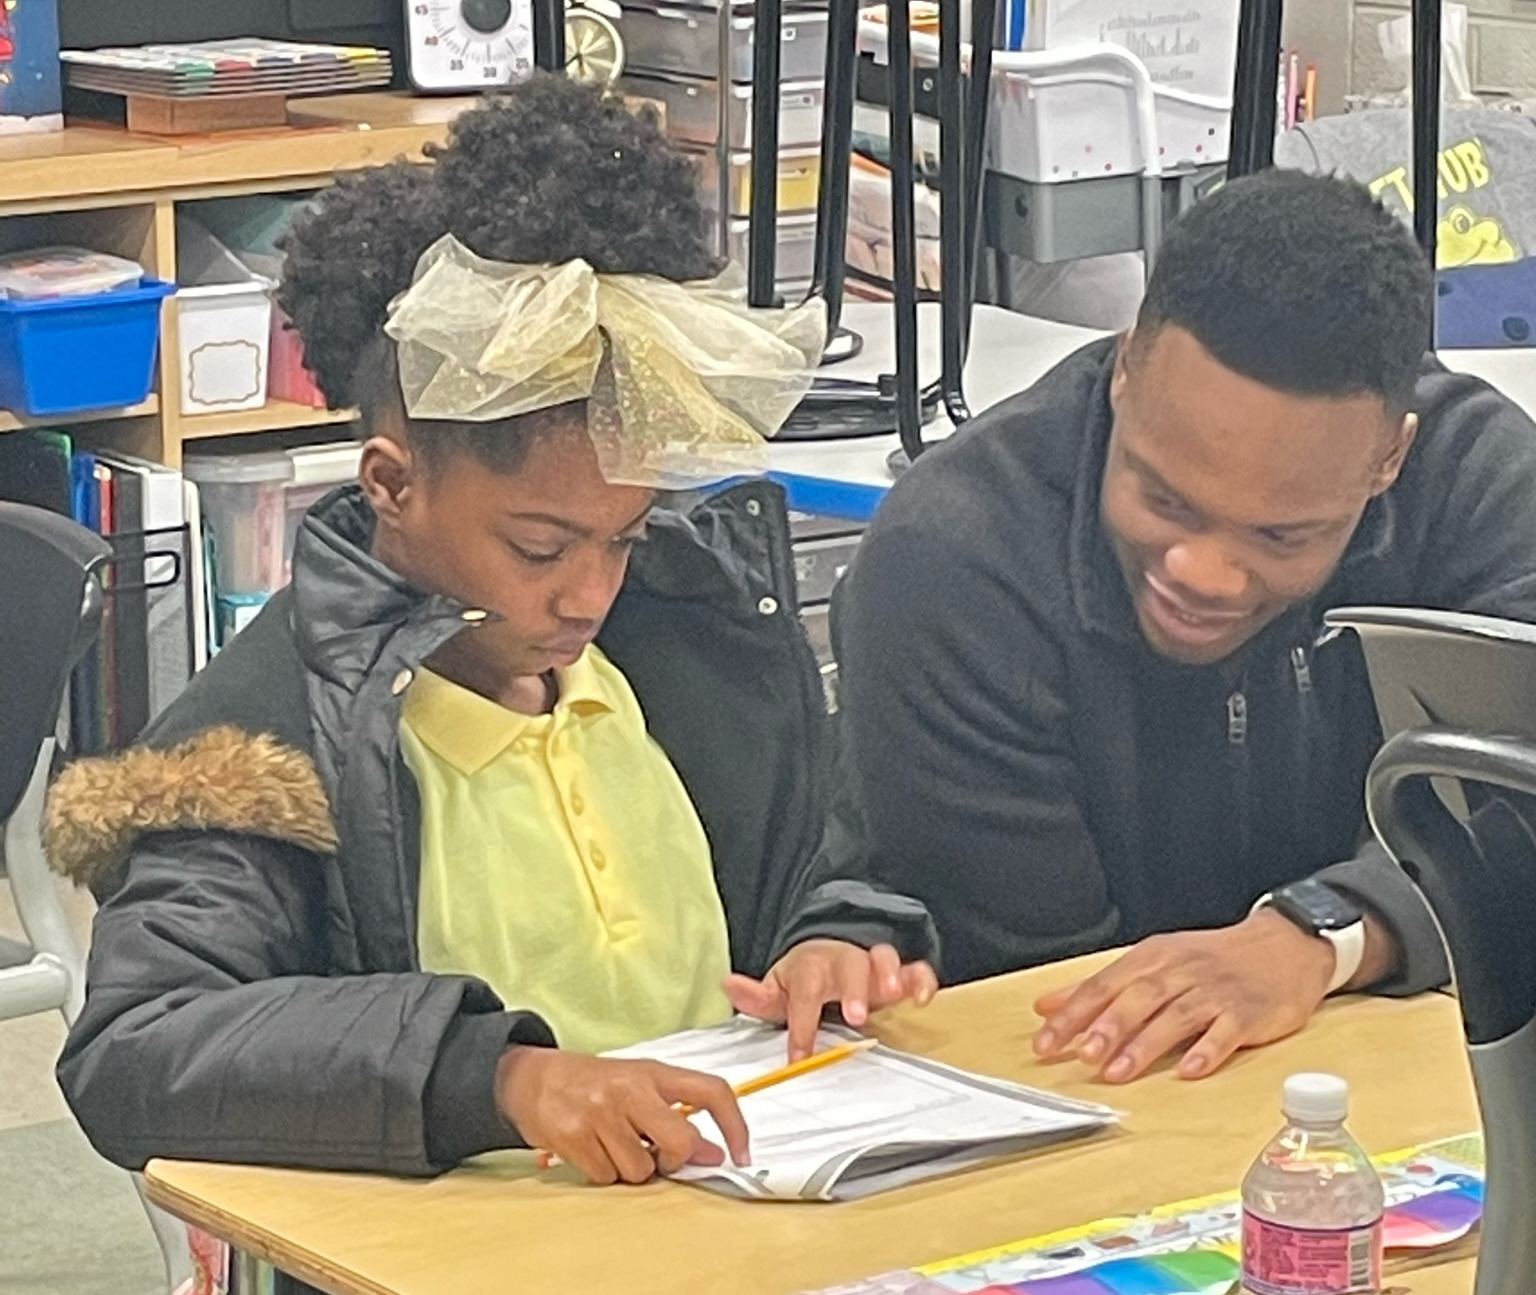 Tutor helps student with reading worksheet at their desk